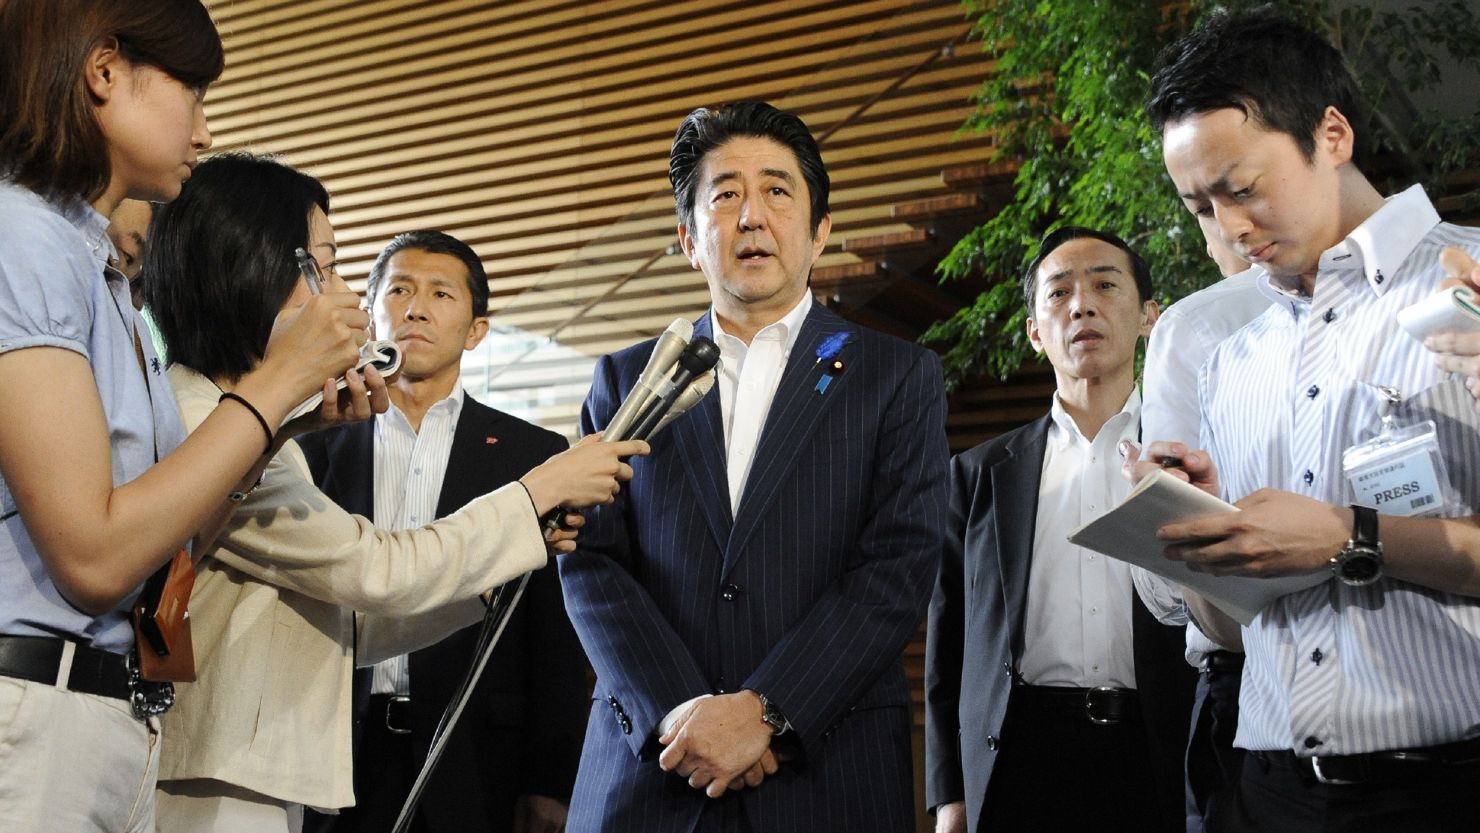 Japanese Prime Minister Shinzo Abe will arrive in Washington Monday for a state visit.